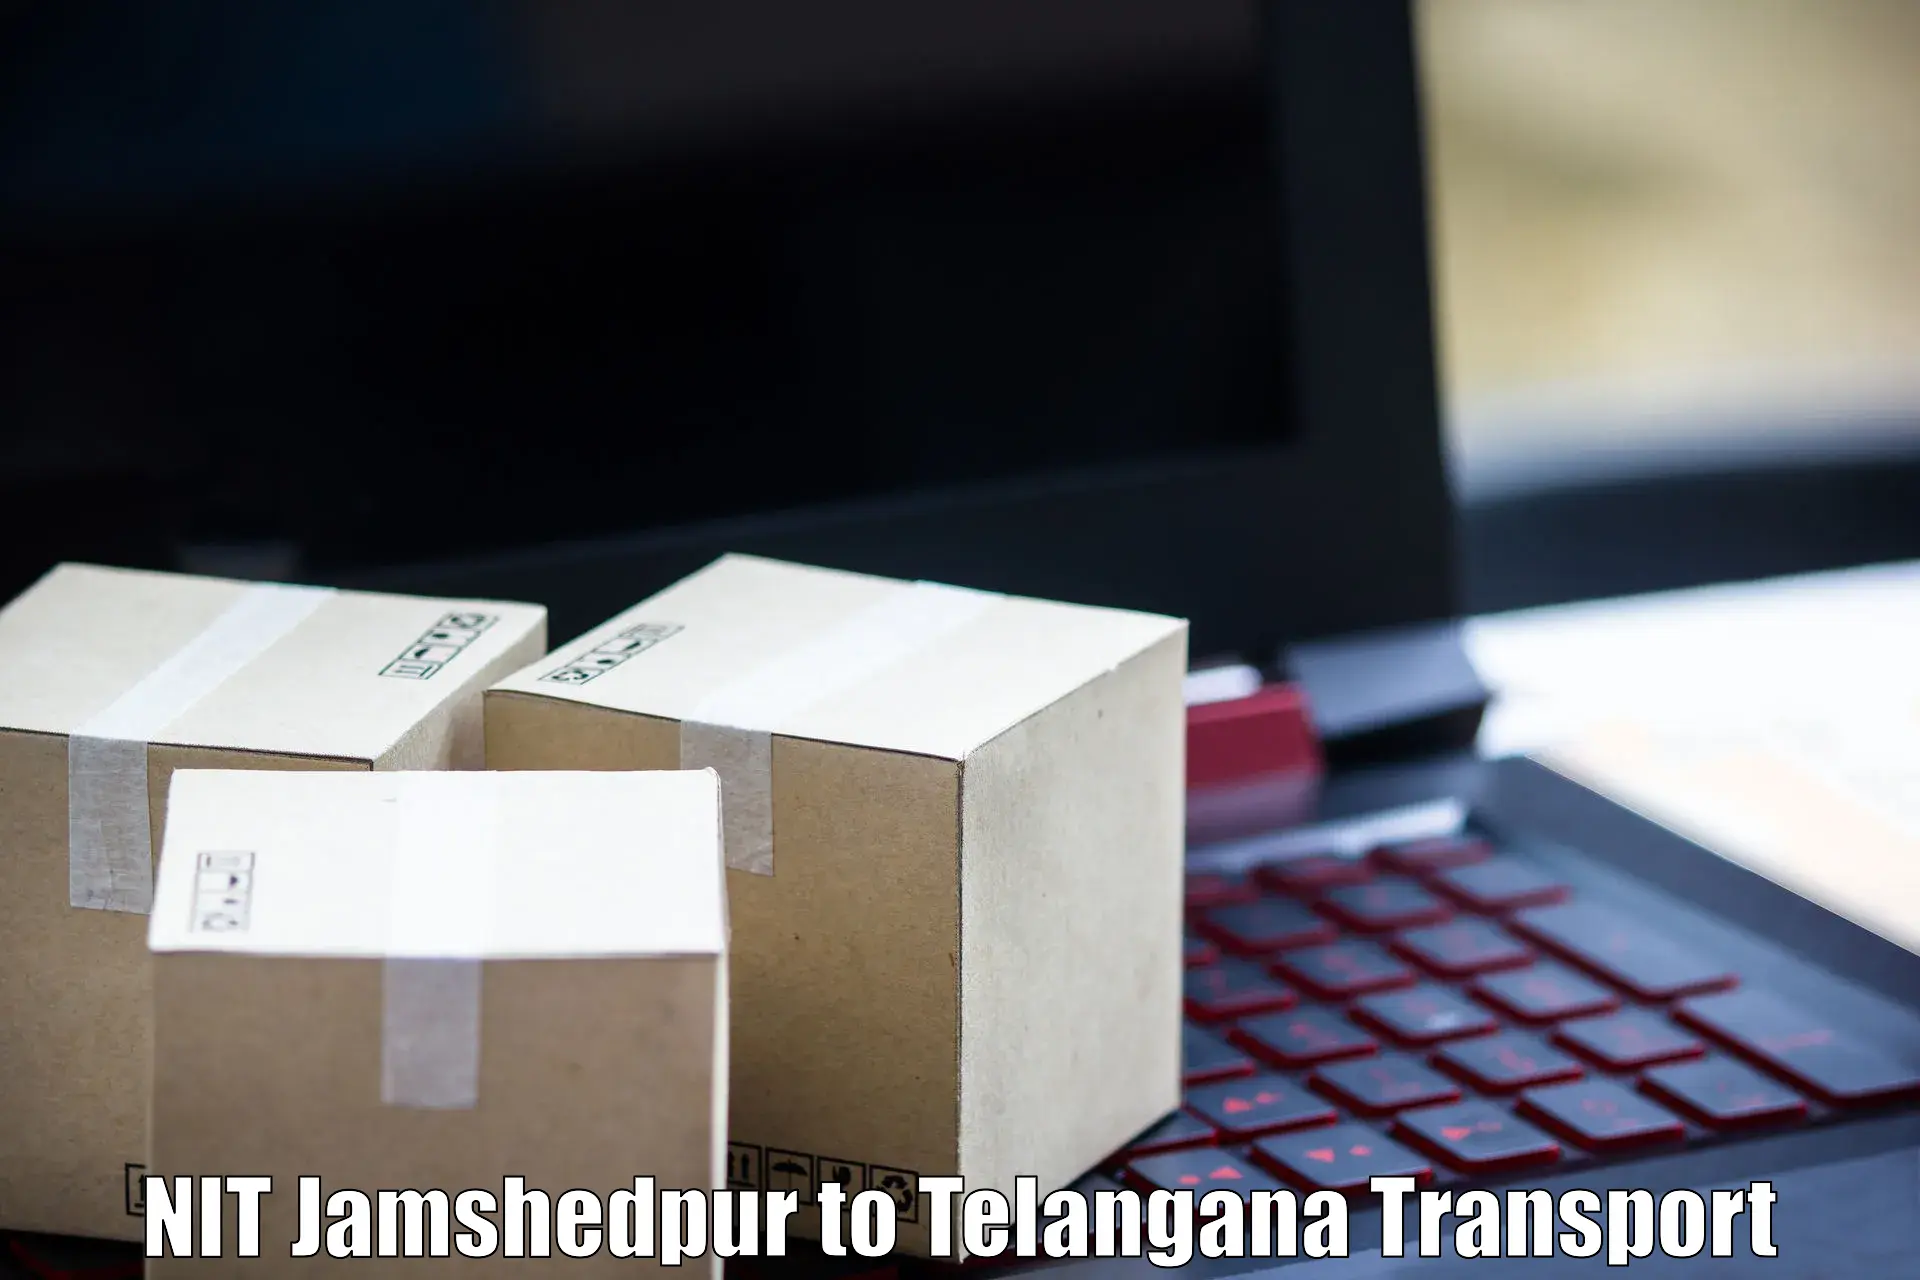 Cargo train transport services in NIT Jamshedpur to Medchal